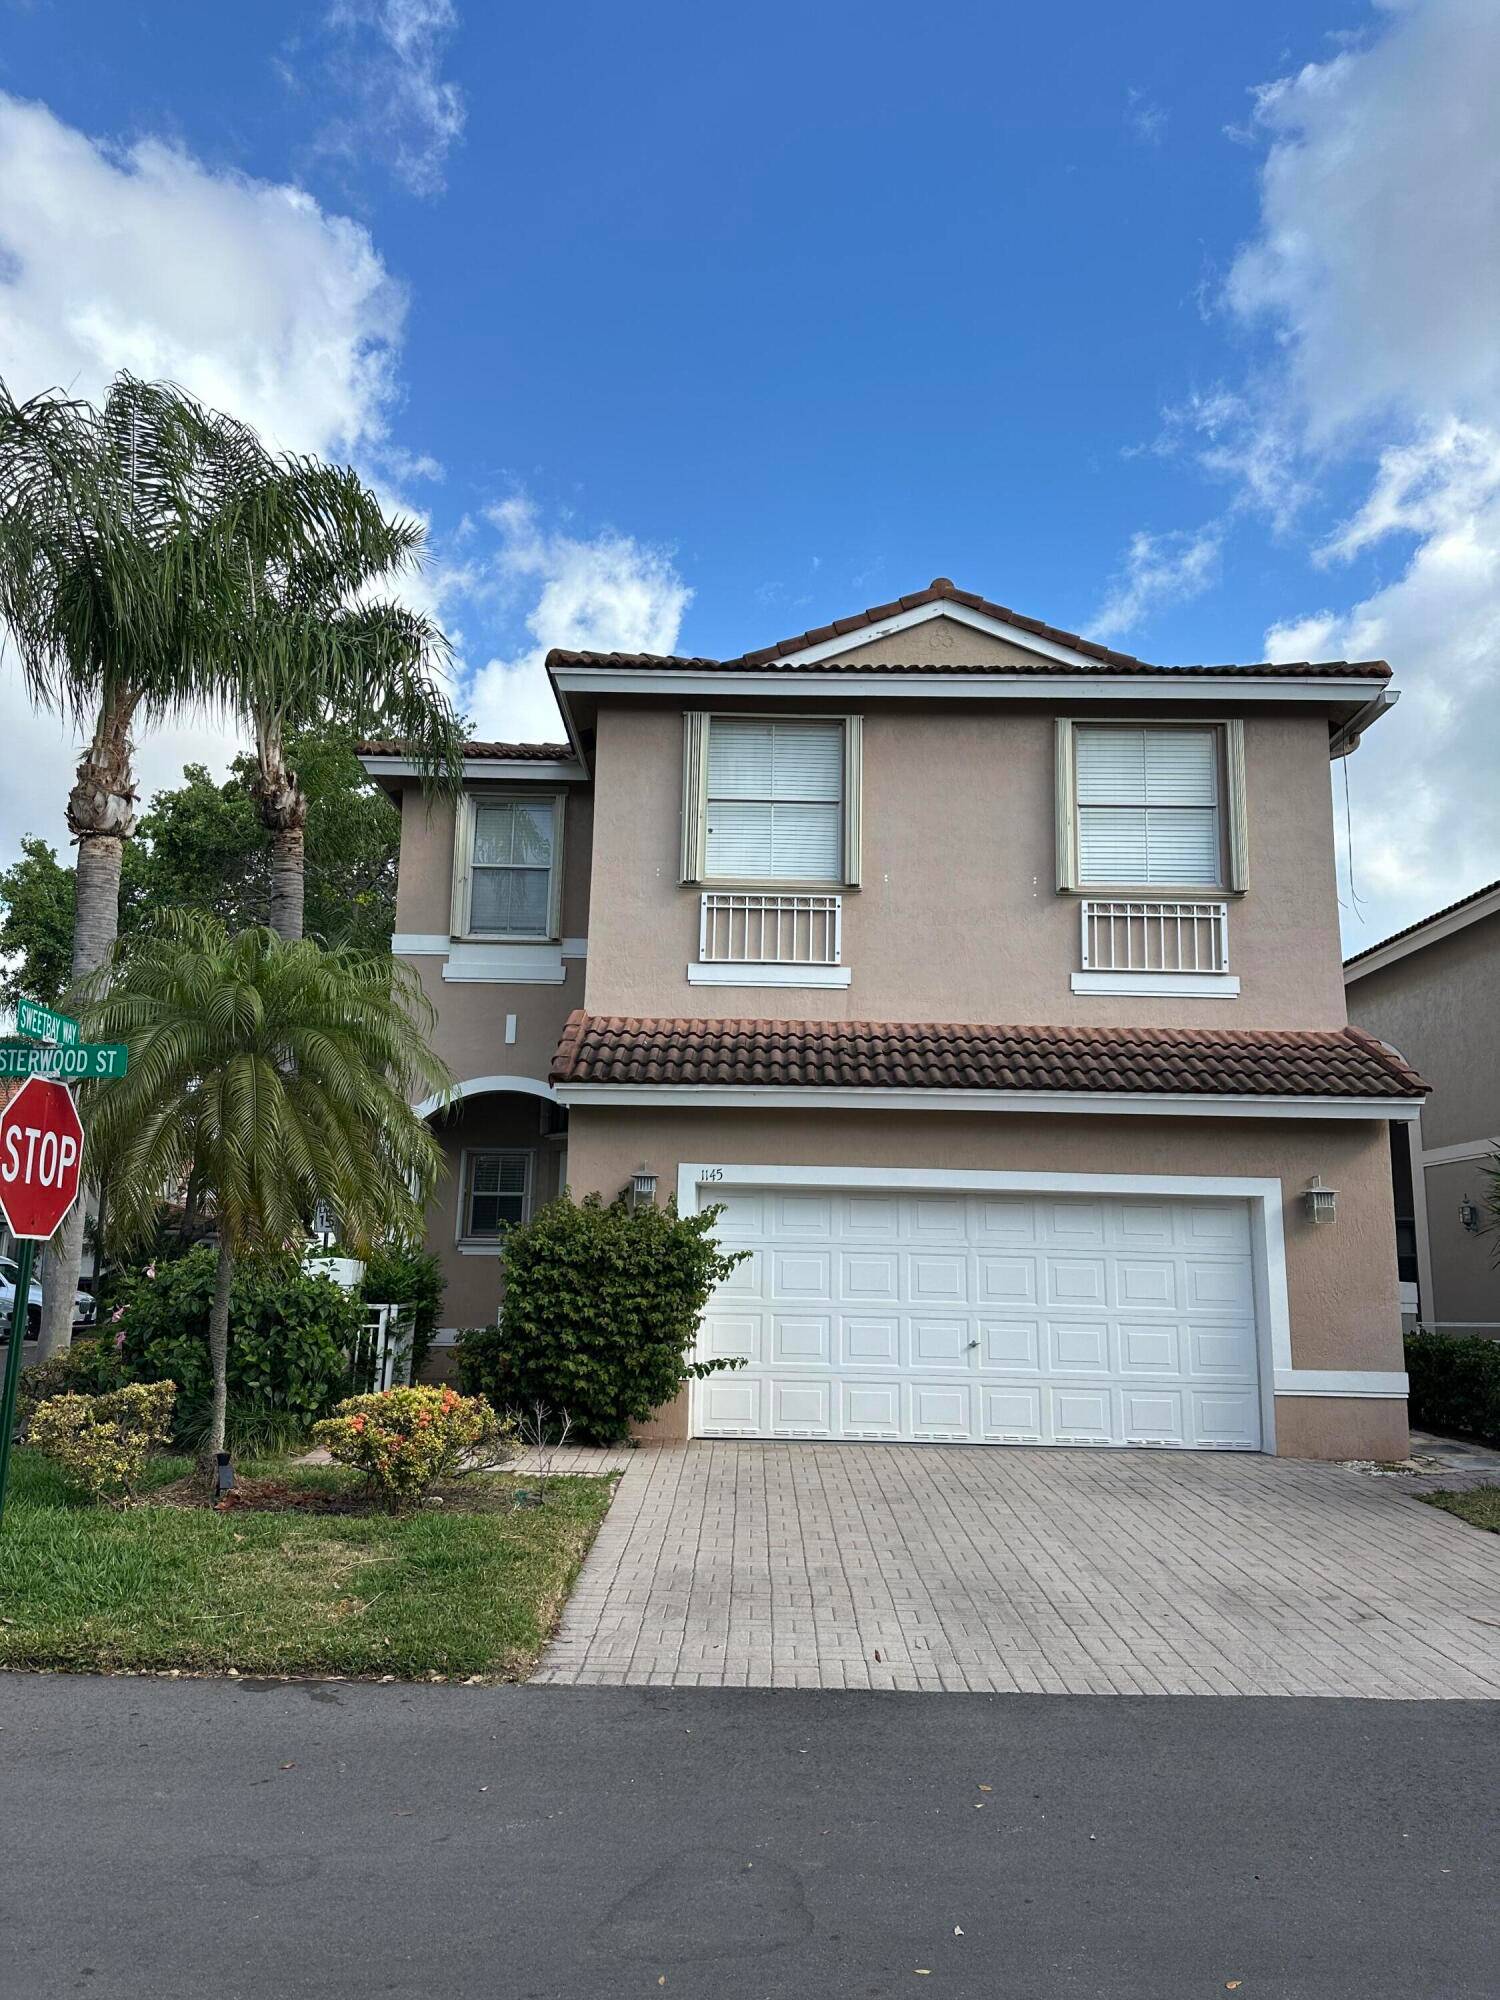 Wonderful large pool home in a serene gated community offers 4 large bedrooms, tall ceilings, a private back yard patio with Jacuzzi Pool, granite kitchen counters, stainless steel appliances, on ...